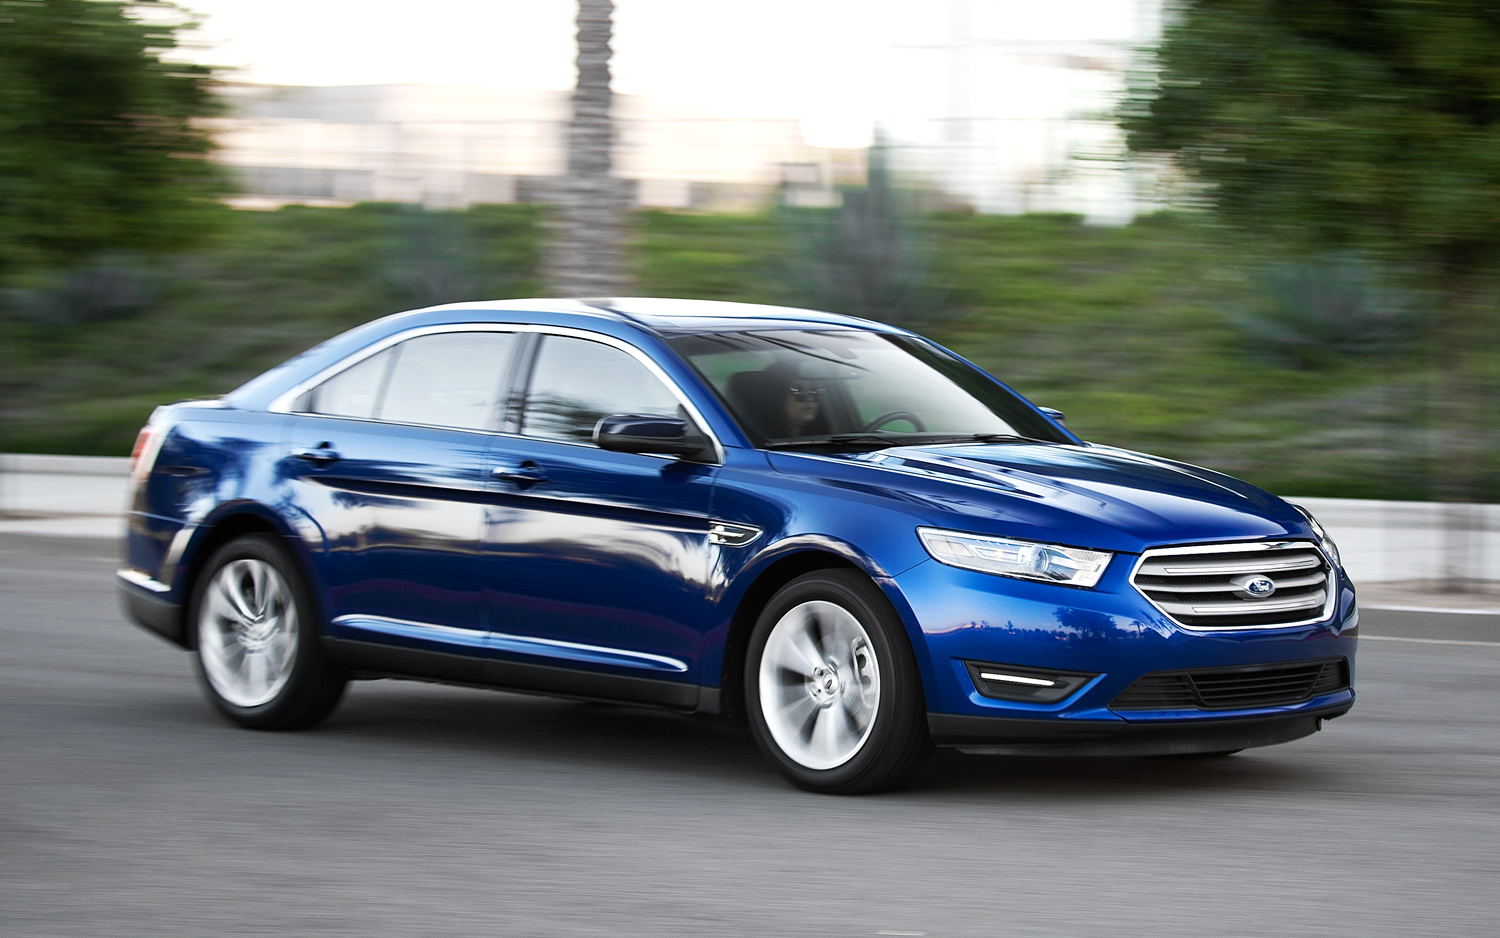 Ford Taurus Wallpapers Vehicles Hq Ford Taurus Pictures 4k Wallpapers 2019